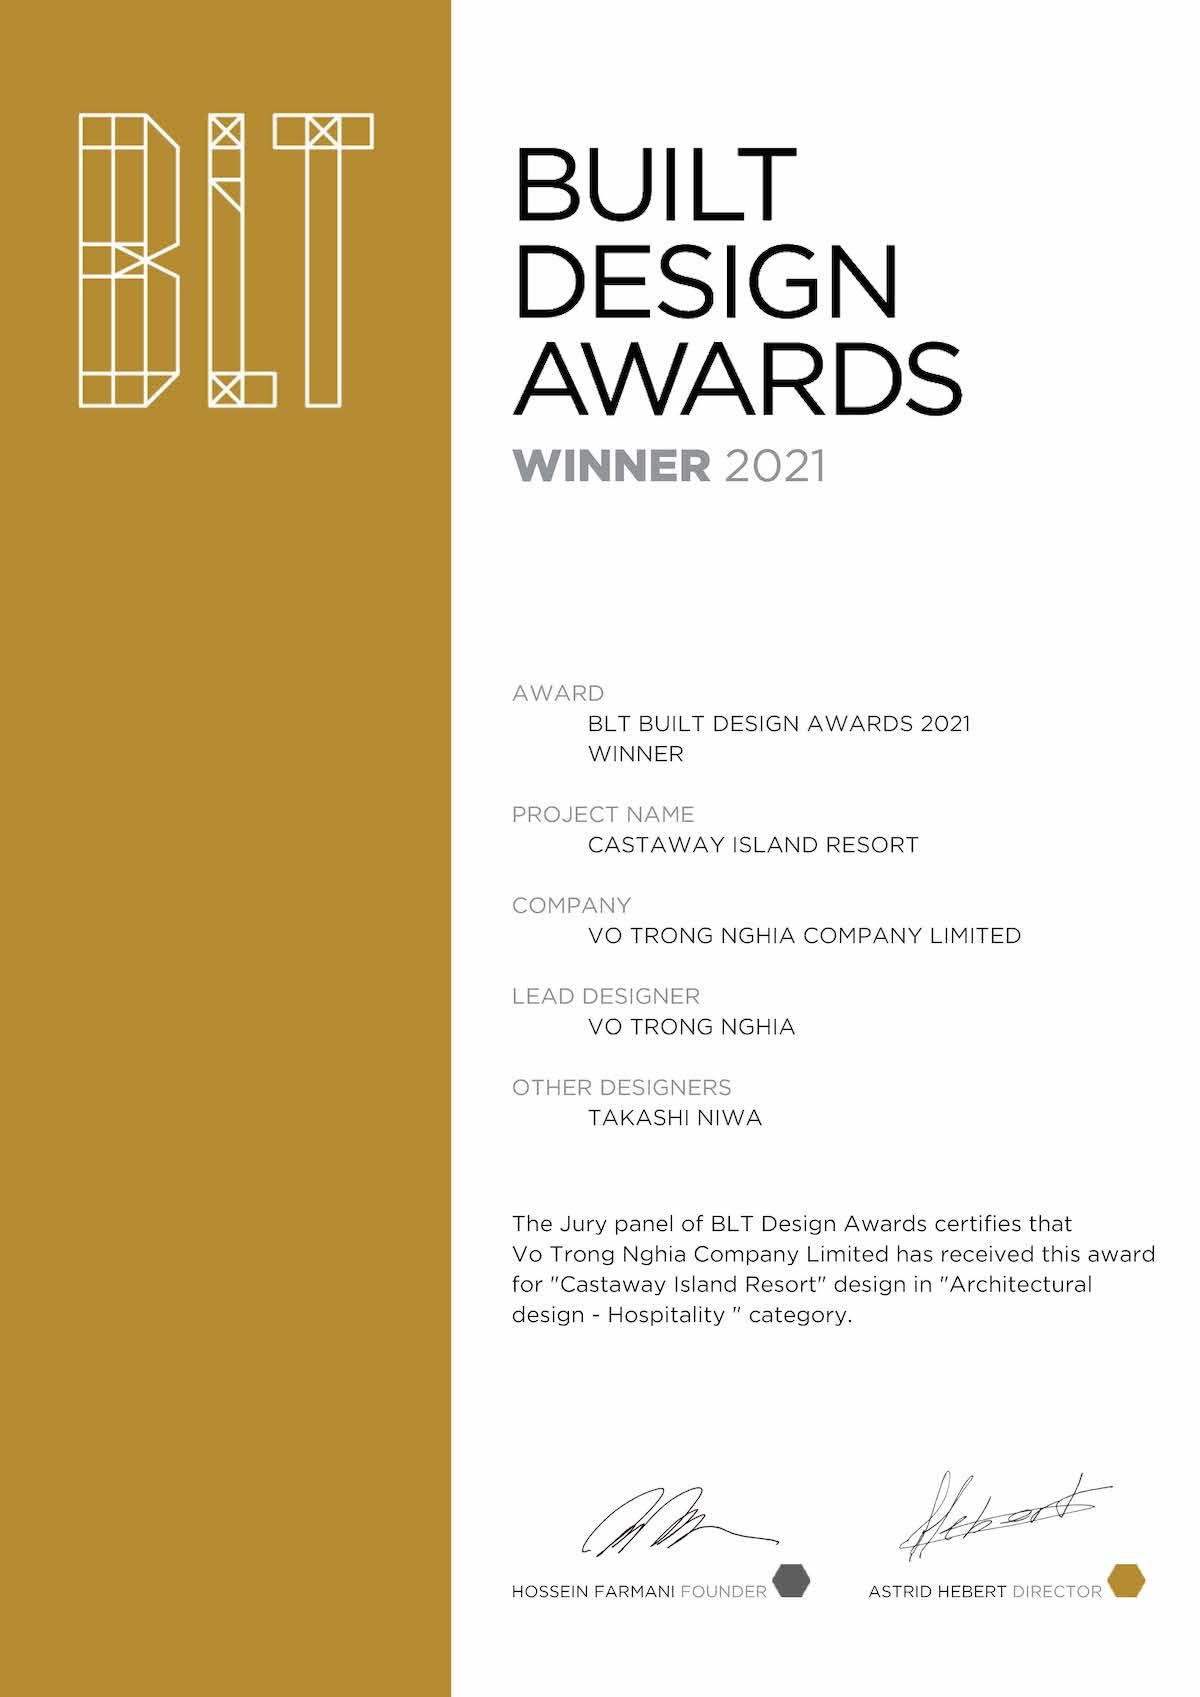 kienviet vo trong nghia architects vtn architects gianh chien thang tai blt built design awards 2021 30